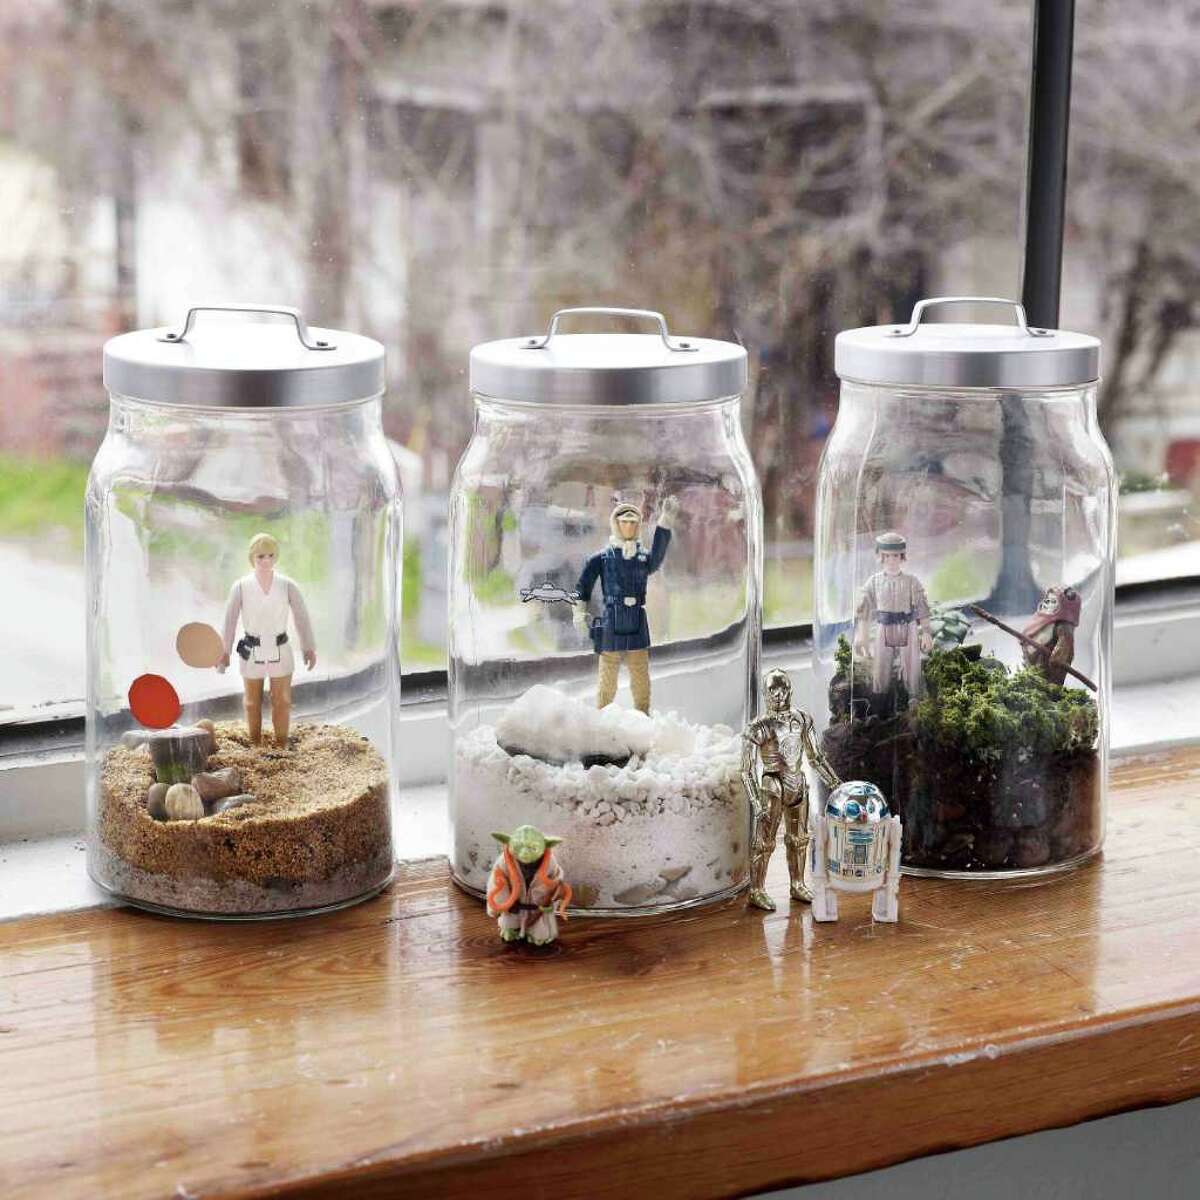 "Star Wars" terrariums from "World of Geekcraft: Step-by-Step Instructions for 25 Super-Cool Craft Projects" by Susan Beal.